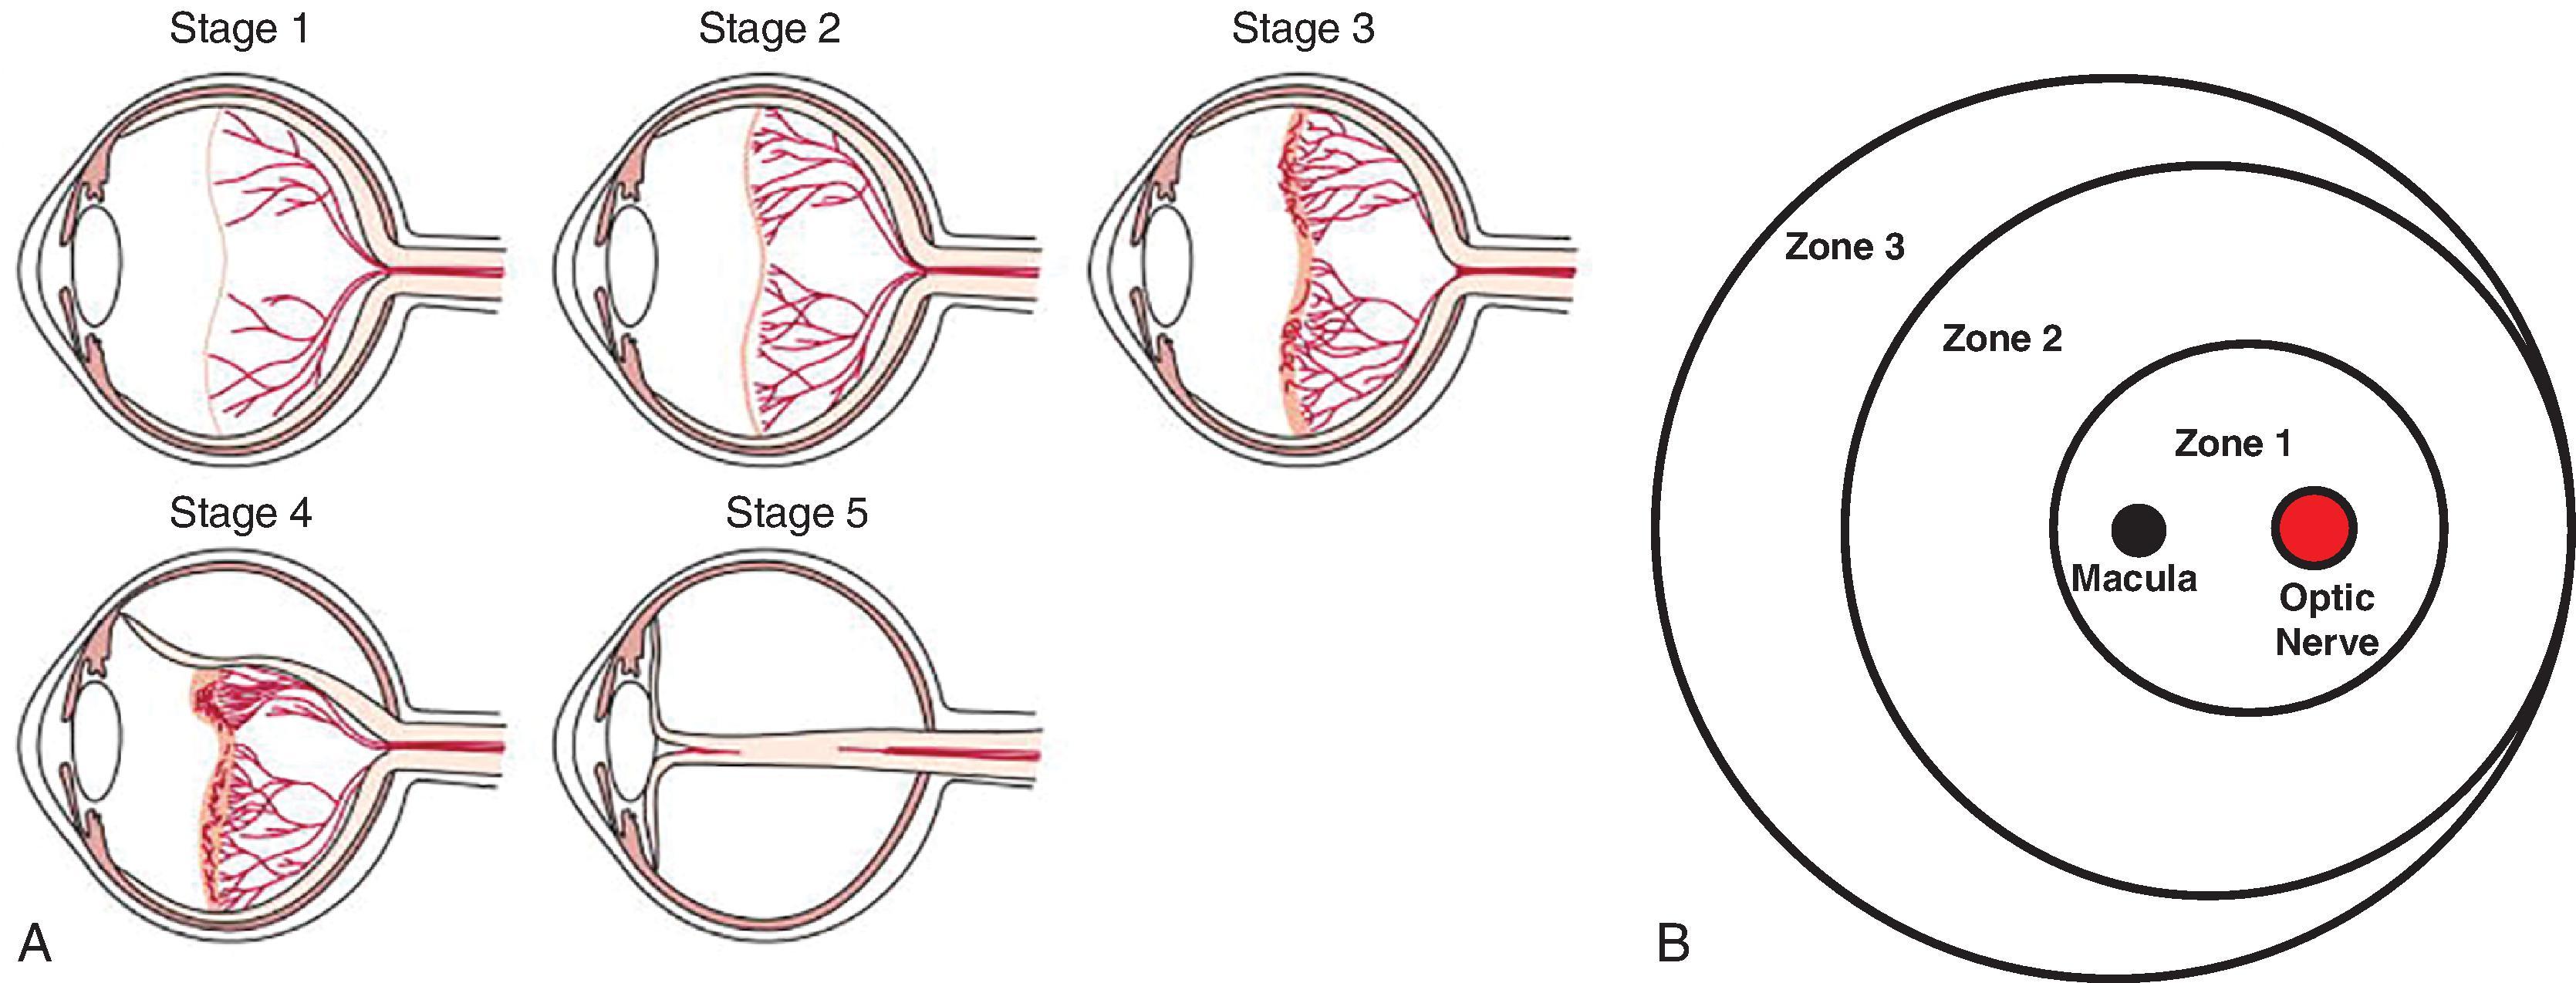 Fig. 62.1, Zones and Stages of Retinopathy of Prematurity (ROP) .